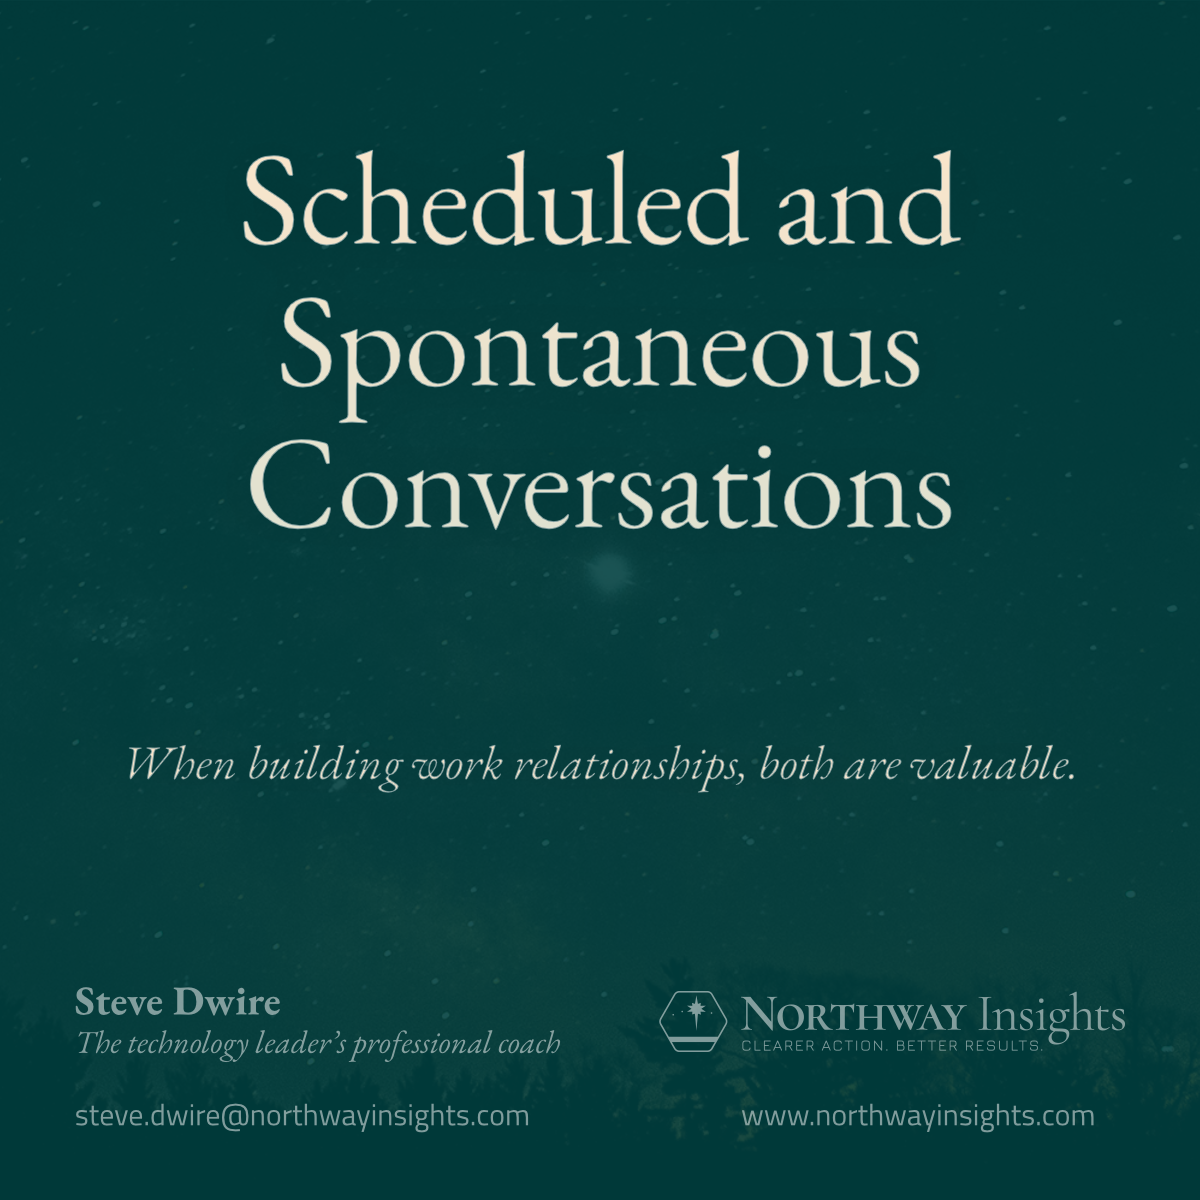 Scheduled and Spontaneous Conversations